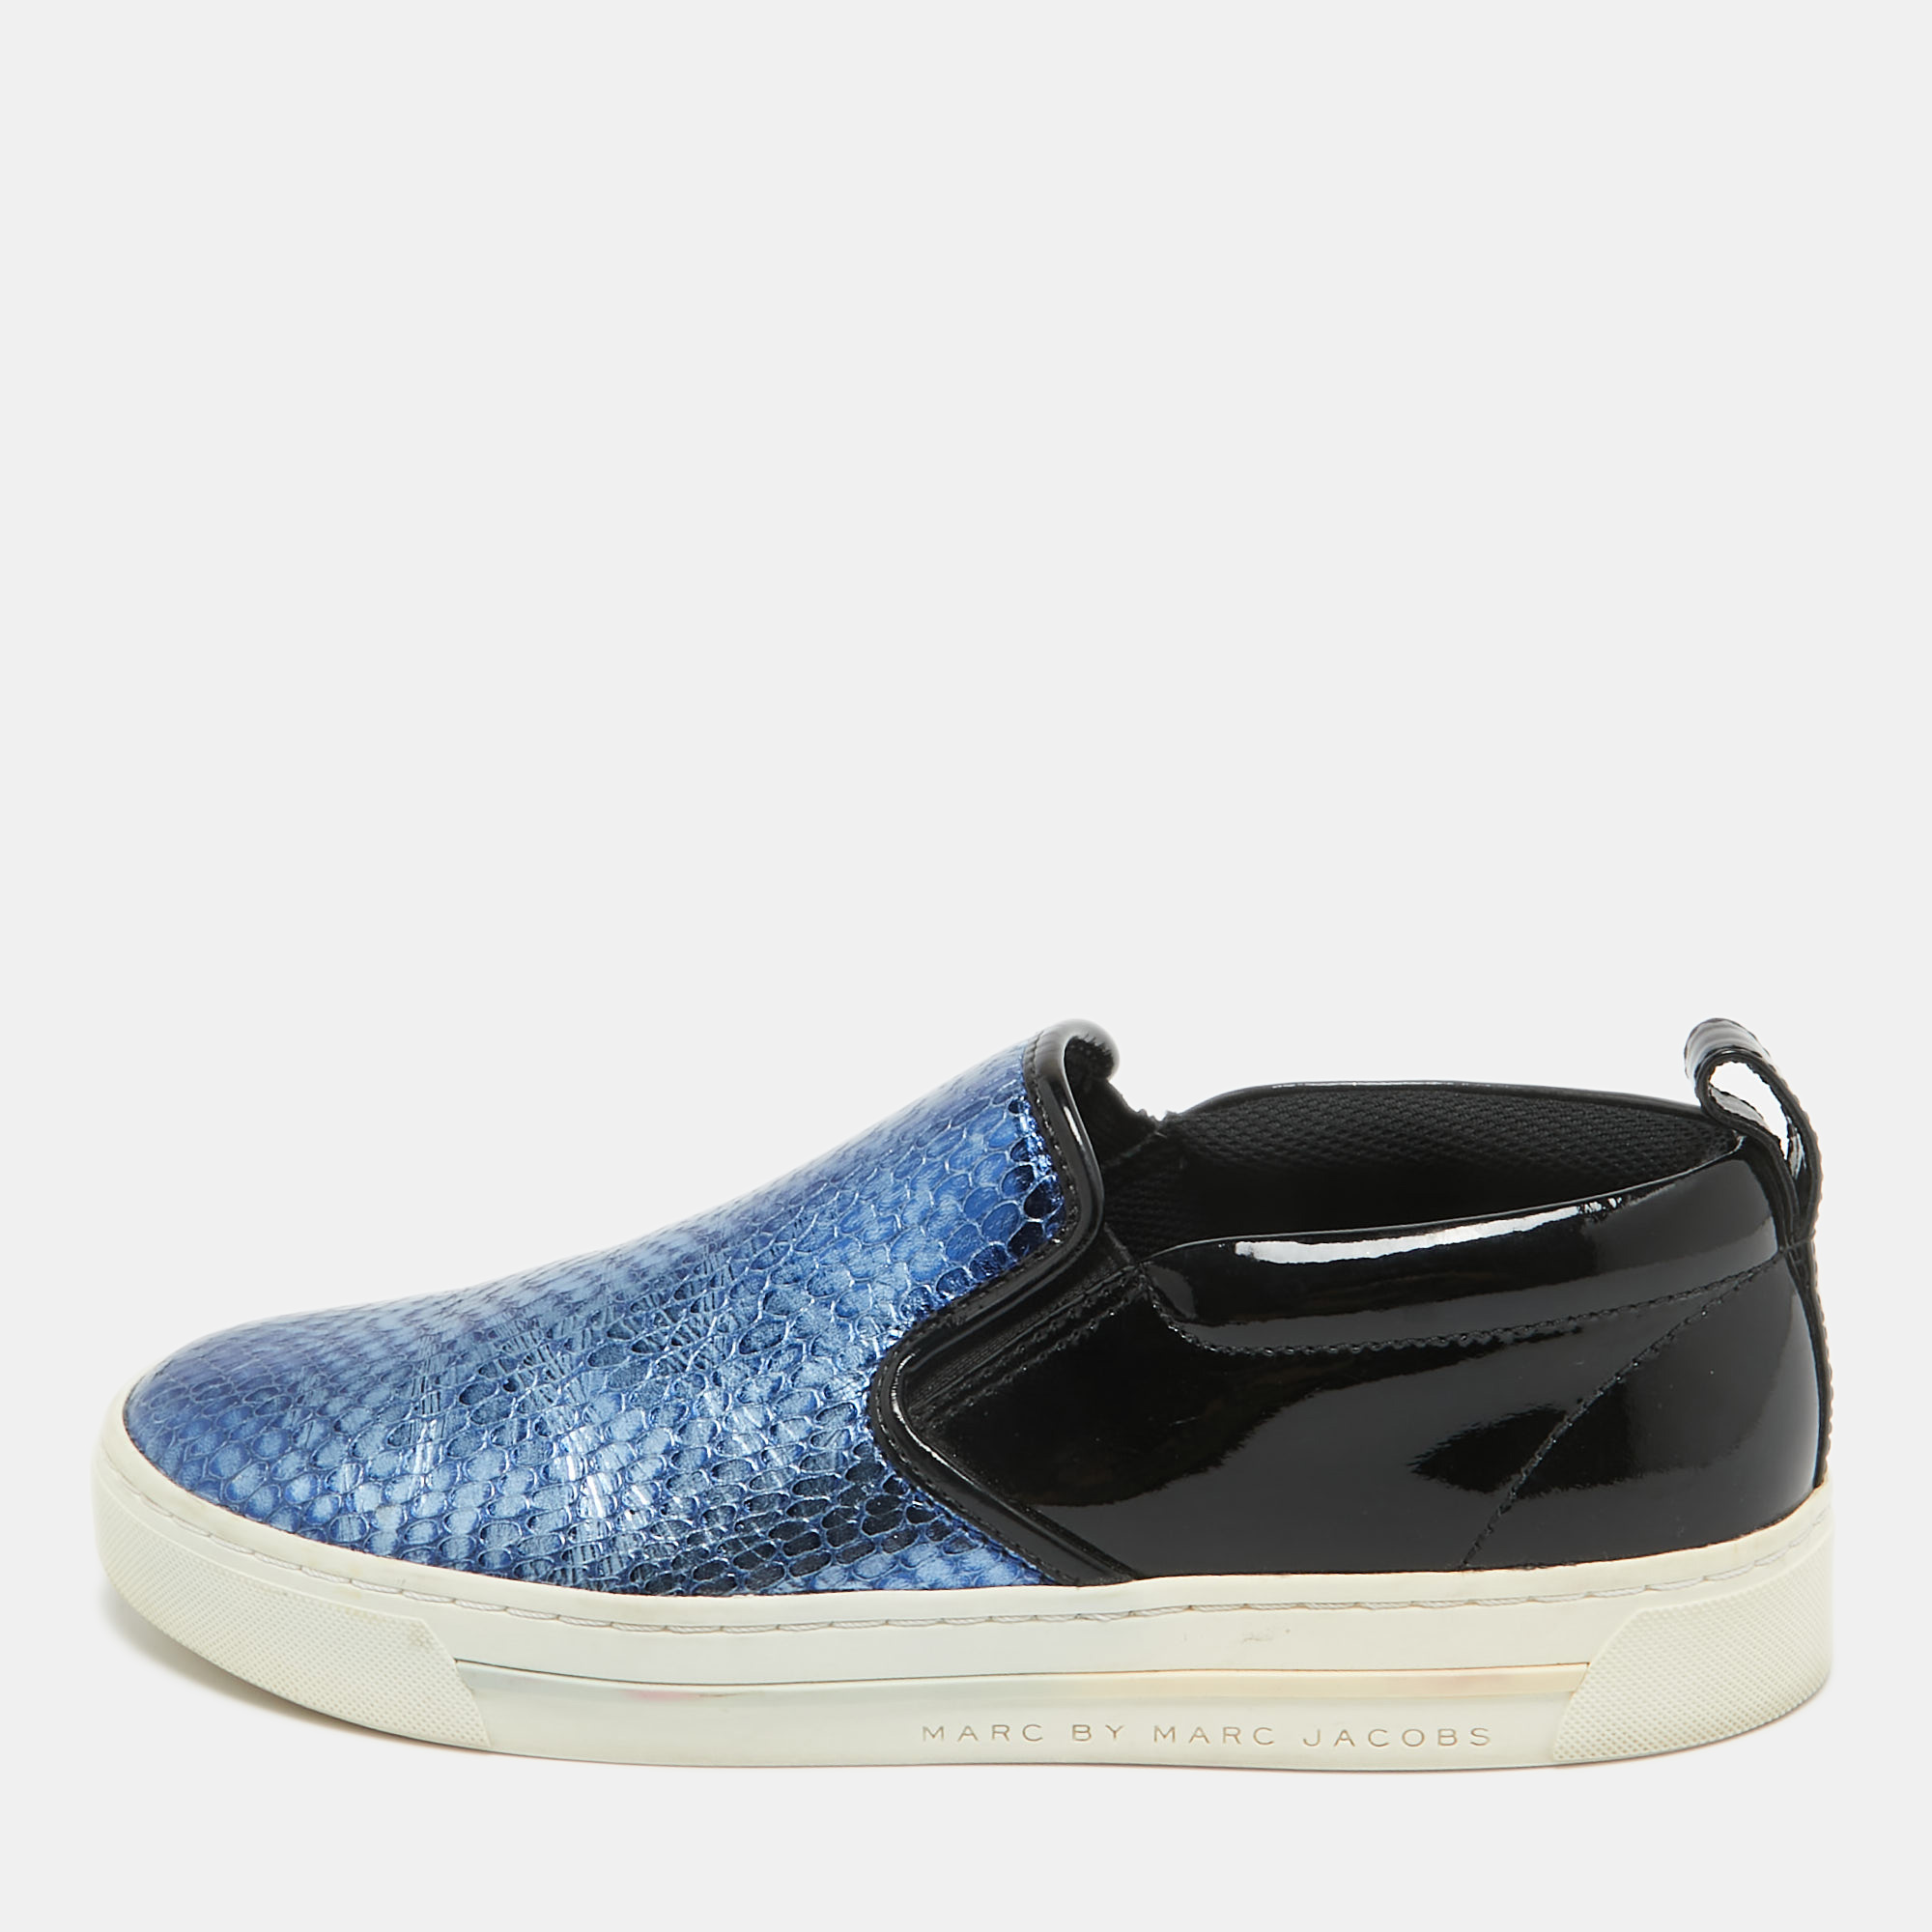 

Marc by Marc Jacobs Blue Python Embossed Leather Broome Sneakers Size